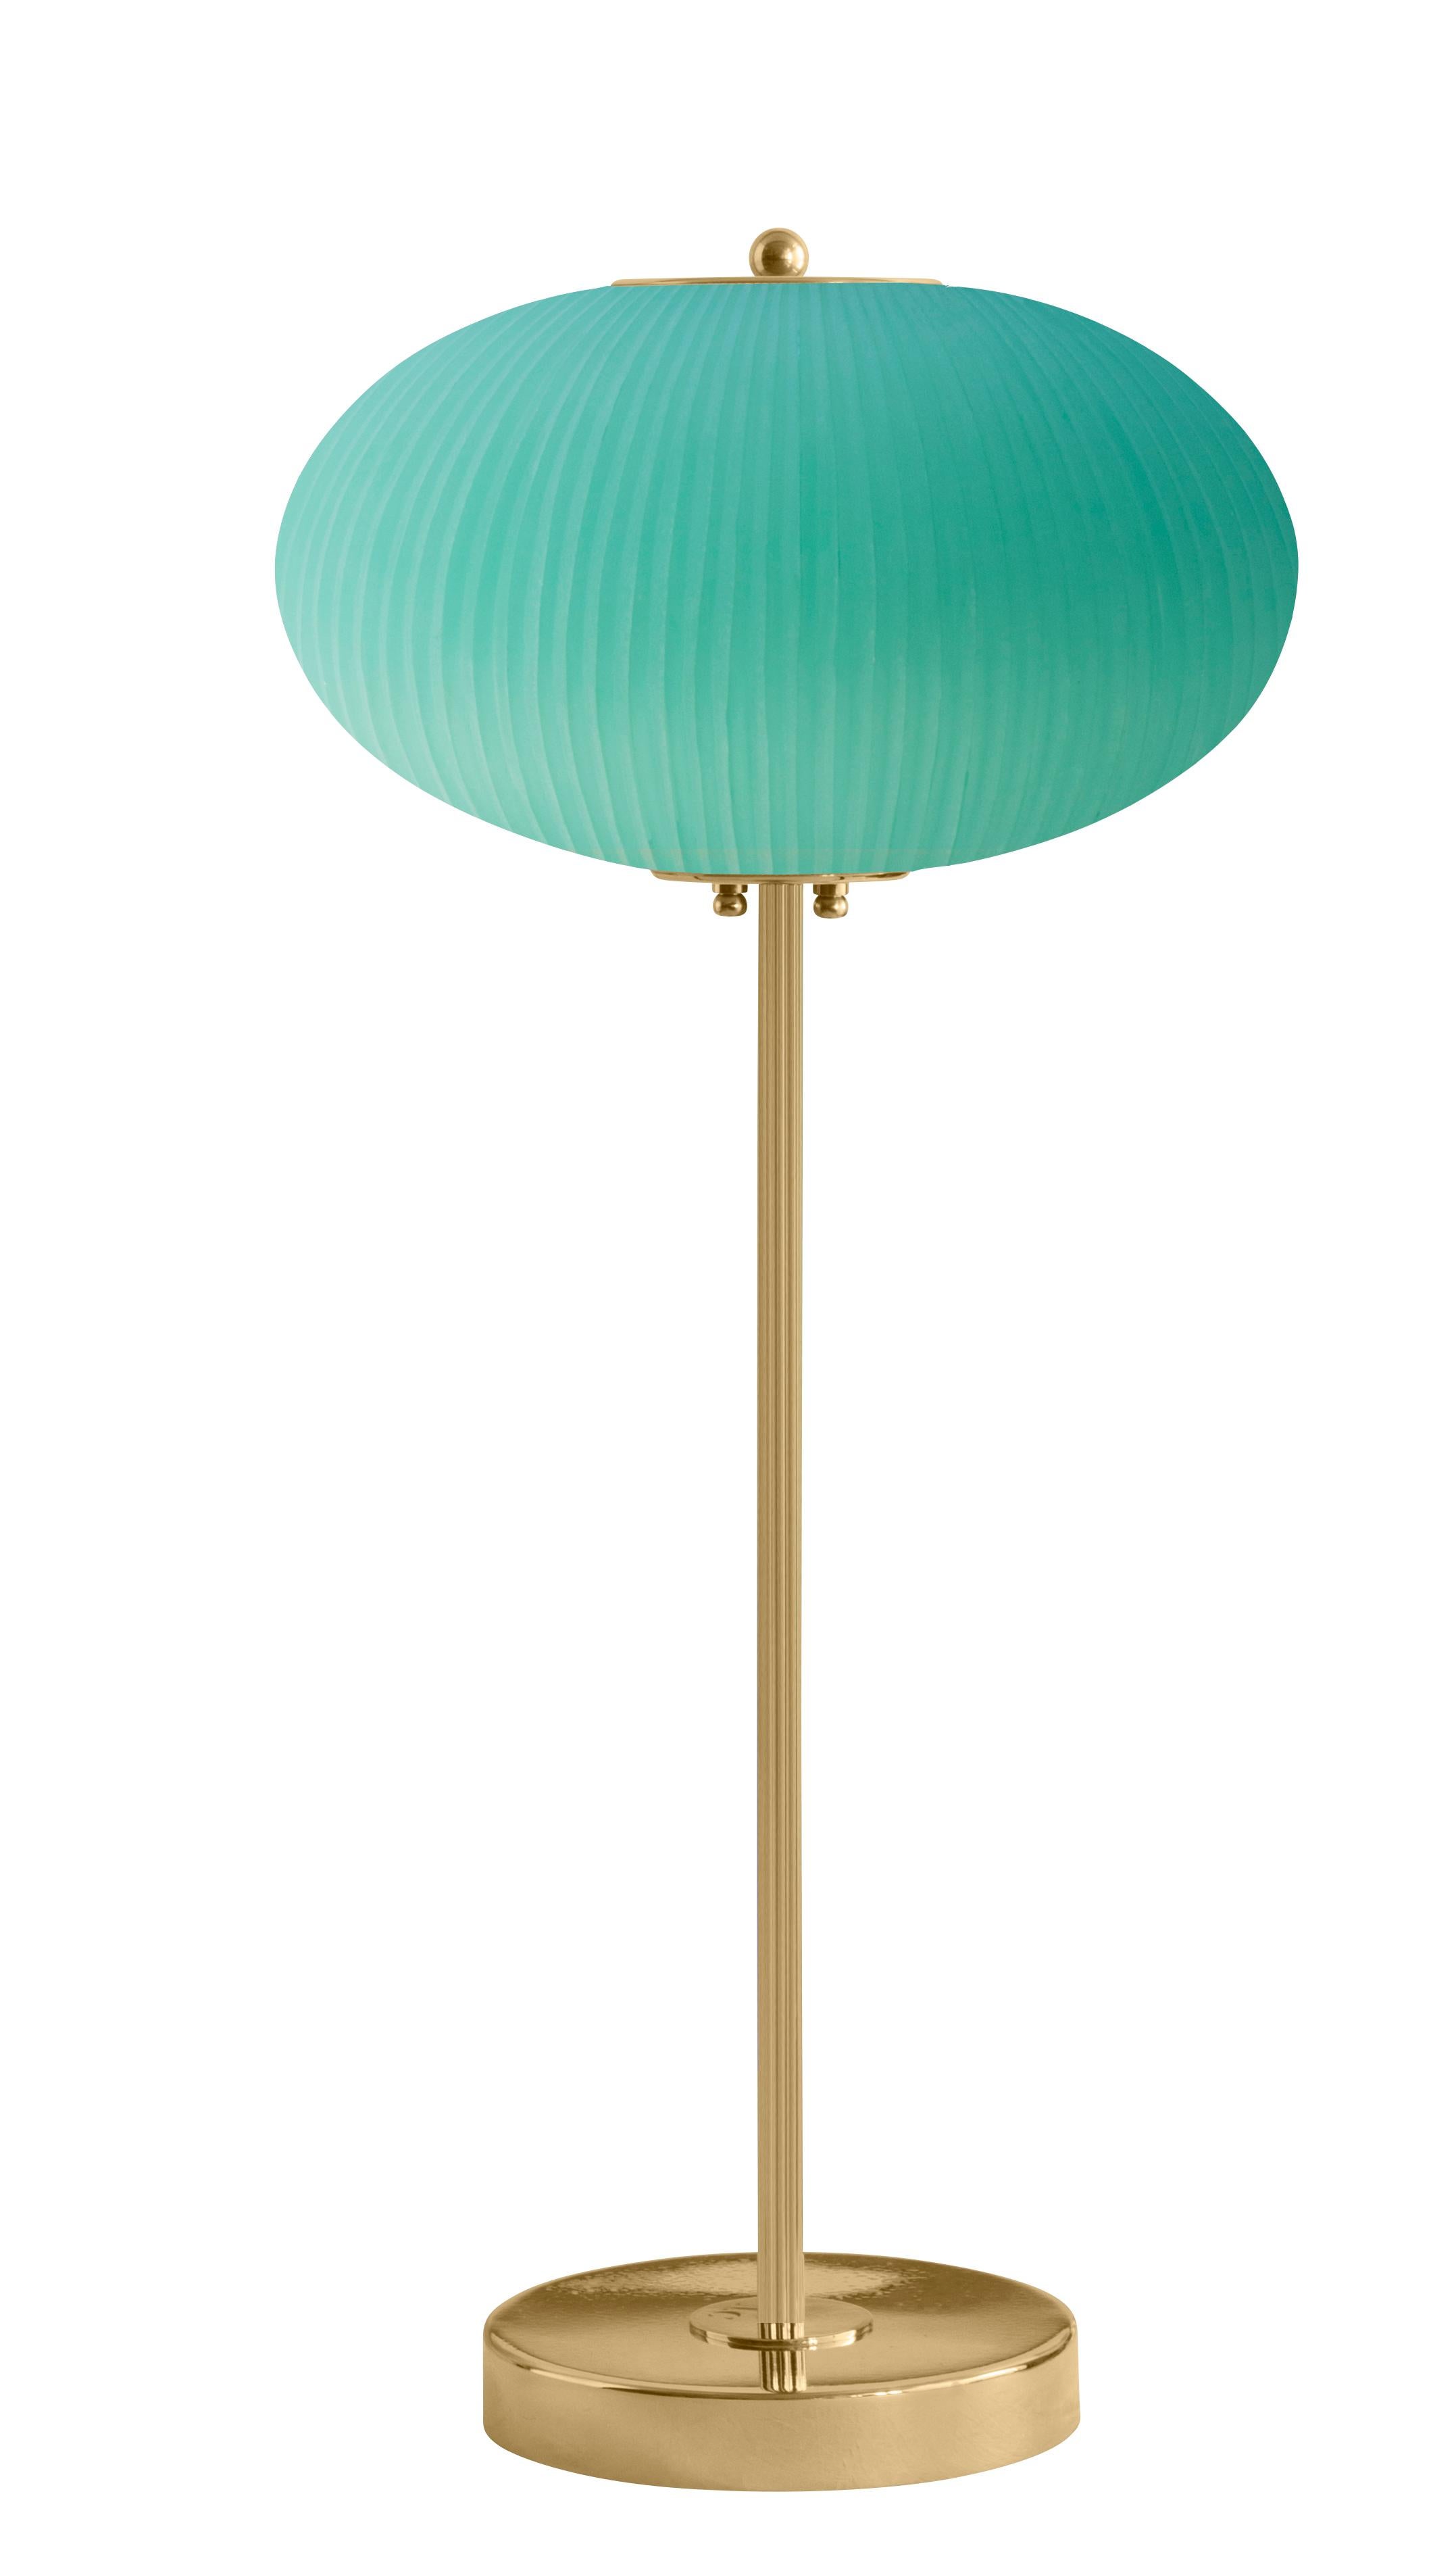 Table lamp China 07 by Magic Circus Editions.
Dimensions: H 70 x W 32 x D 32 cm.
Materials: brass, mouth blown glass sculpted with a diamond saw.
Colour: jade green.

Available finishes: brass, nickel.
Available colours: enamel soft white,